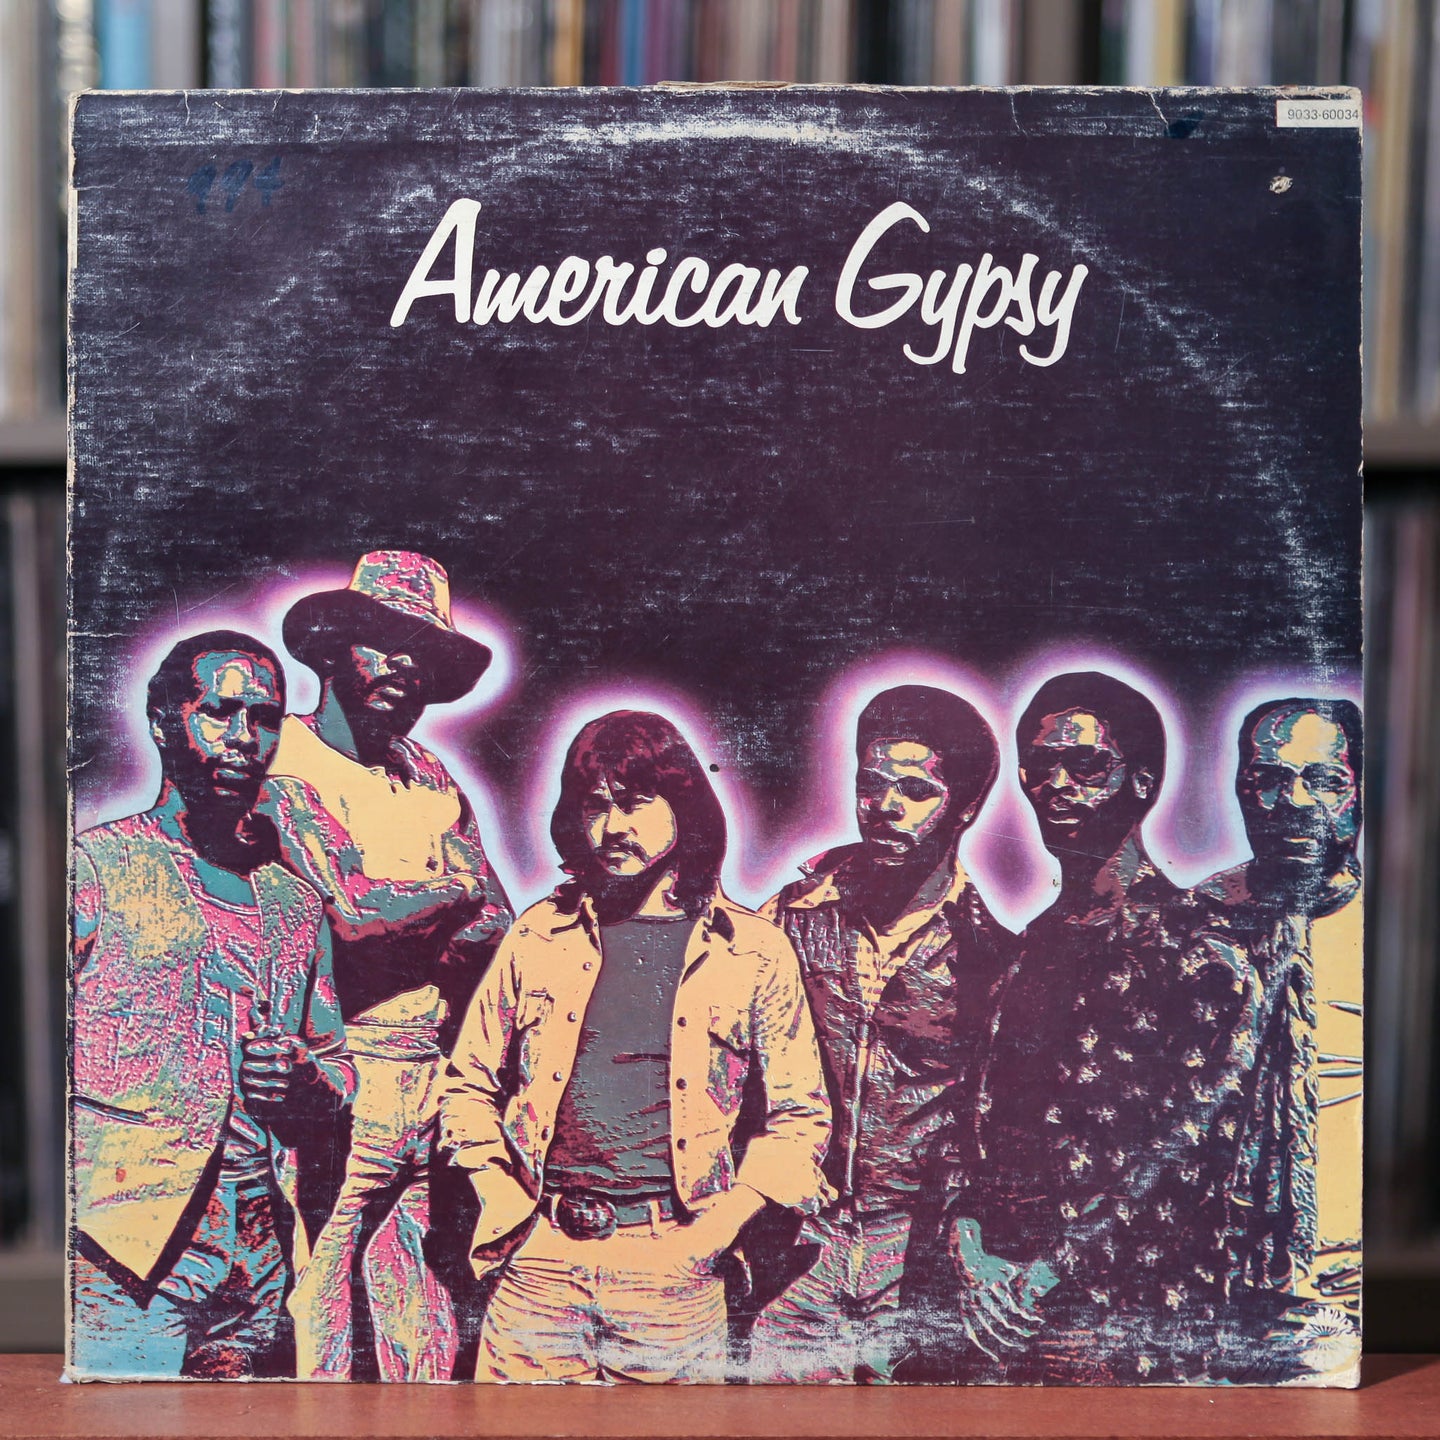 American Gypsy - Self-Titled - Canadian Import - 1975 Chess, VG/VG